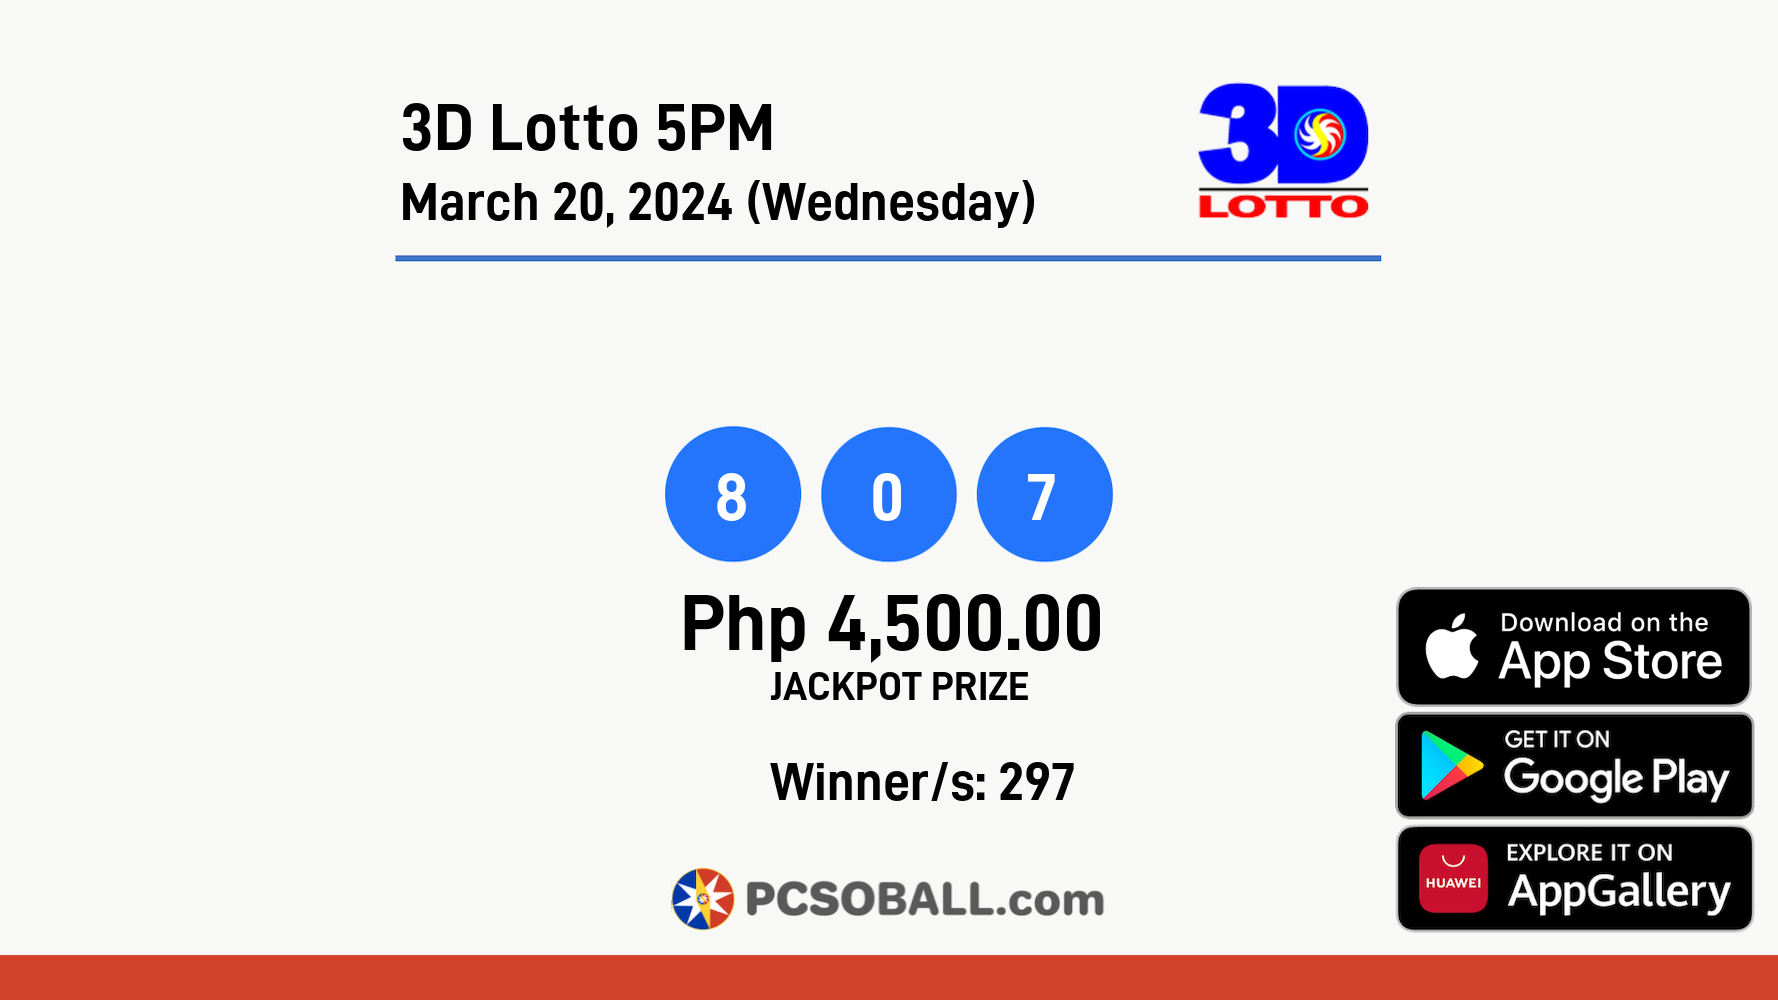 3D Lotto 5PM March 20, 2024 (Wednesday) Result